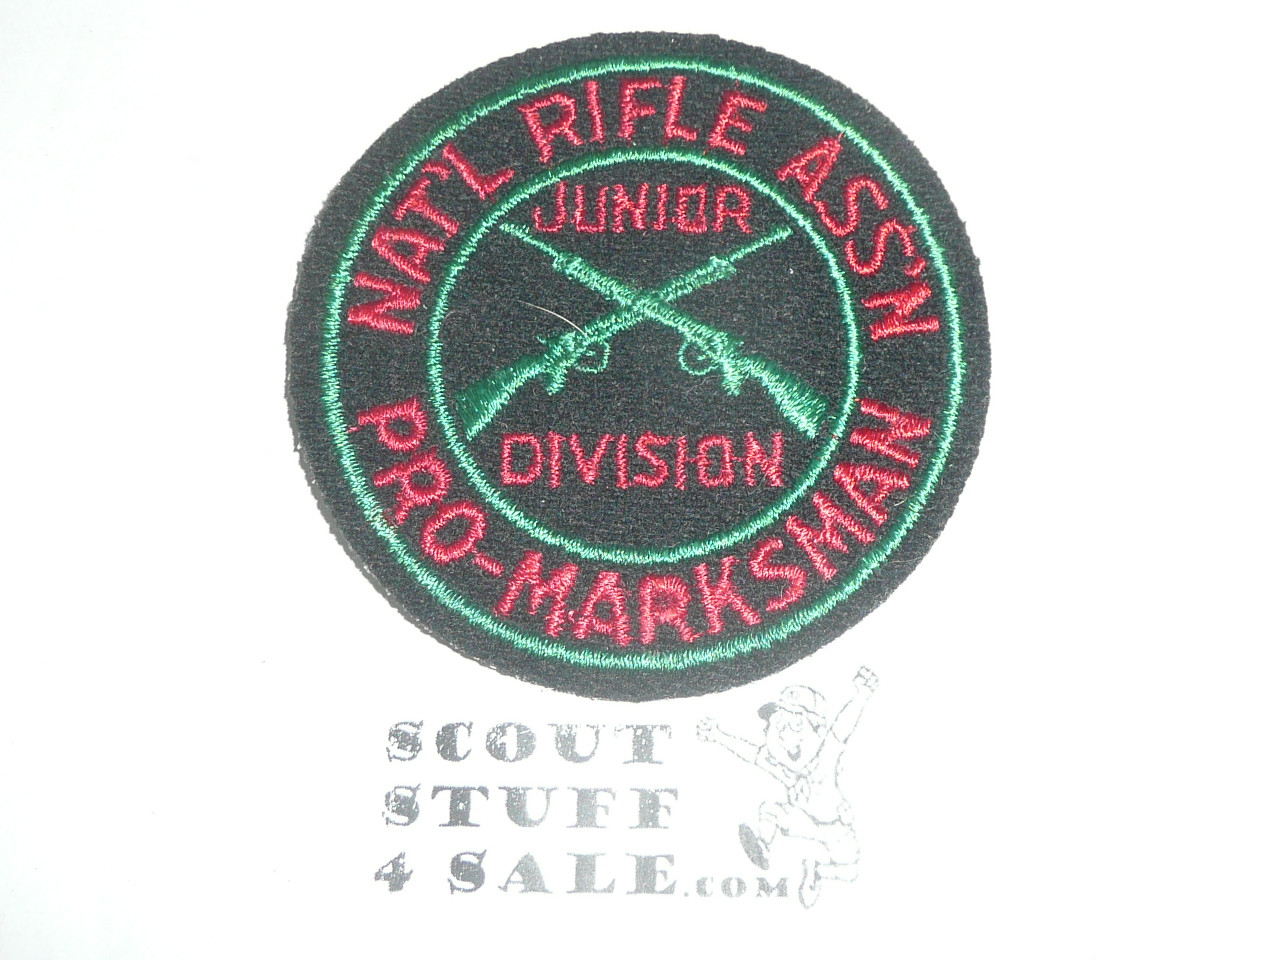 National Rifle Association NRA Junior Division Pro-Marksman Felt Patch, used in Scout Camps